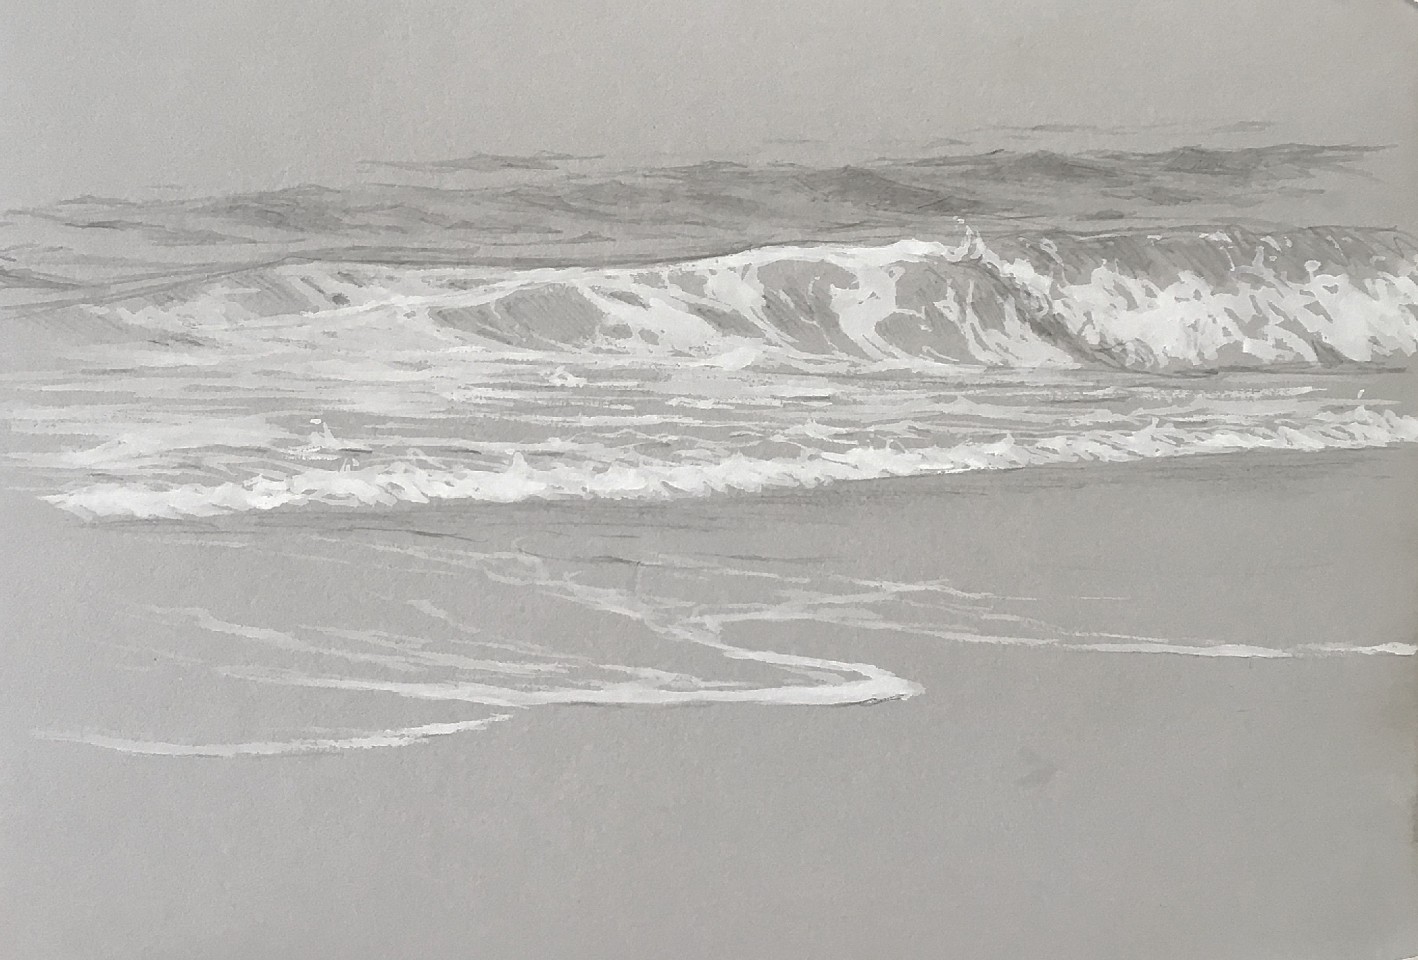 Edward Minoff, Shoreline, sketch, 2018
graphite and gouache on toned paper, 5 1/2 x 7 1/2 in. (14 x 19.1 cm)
EM181020